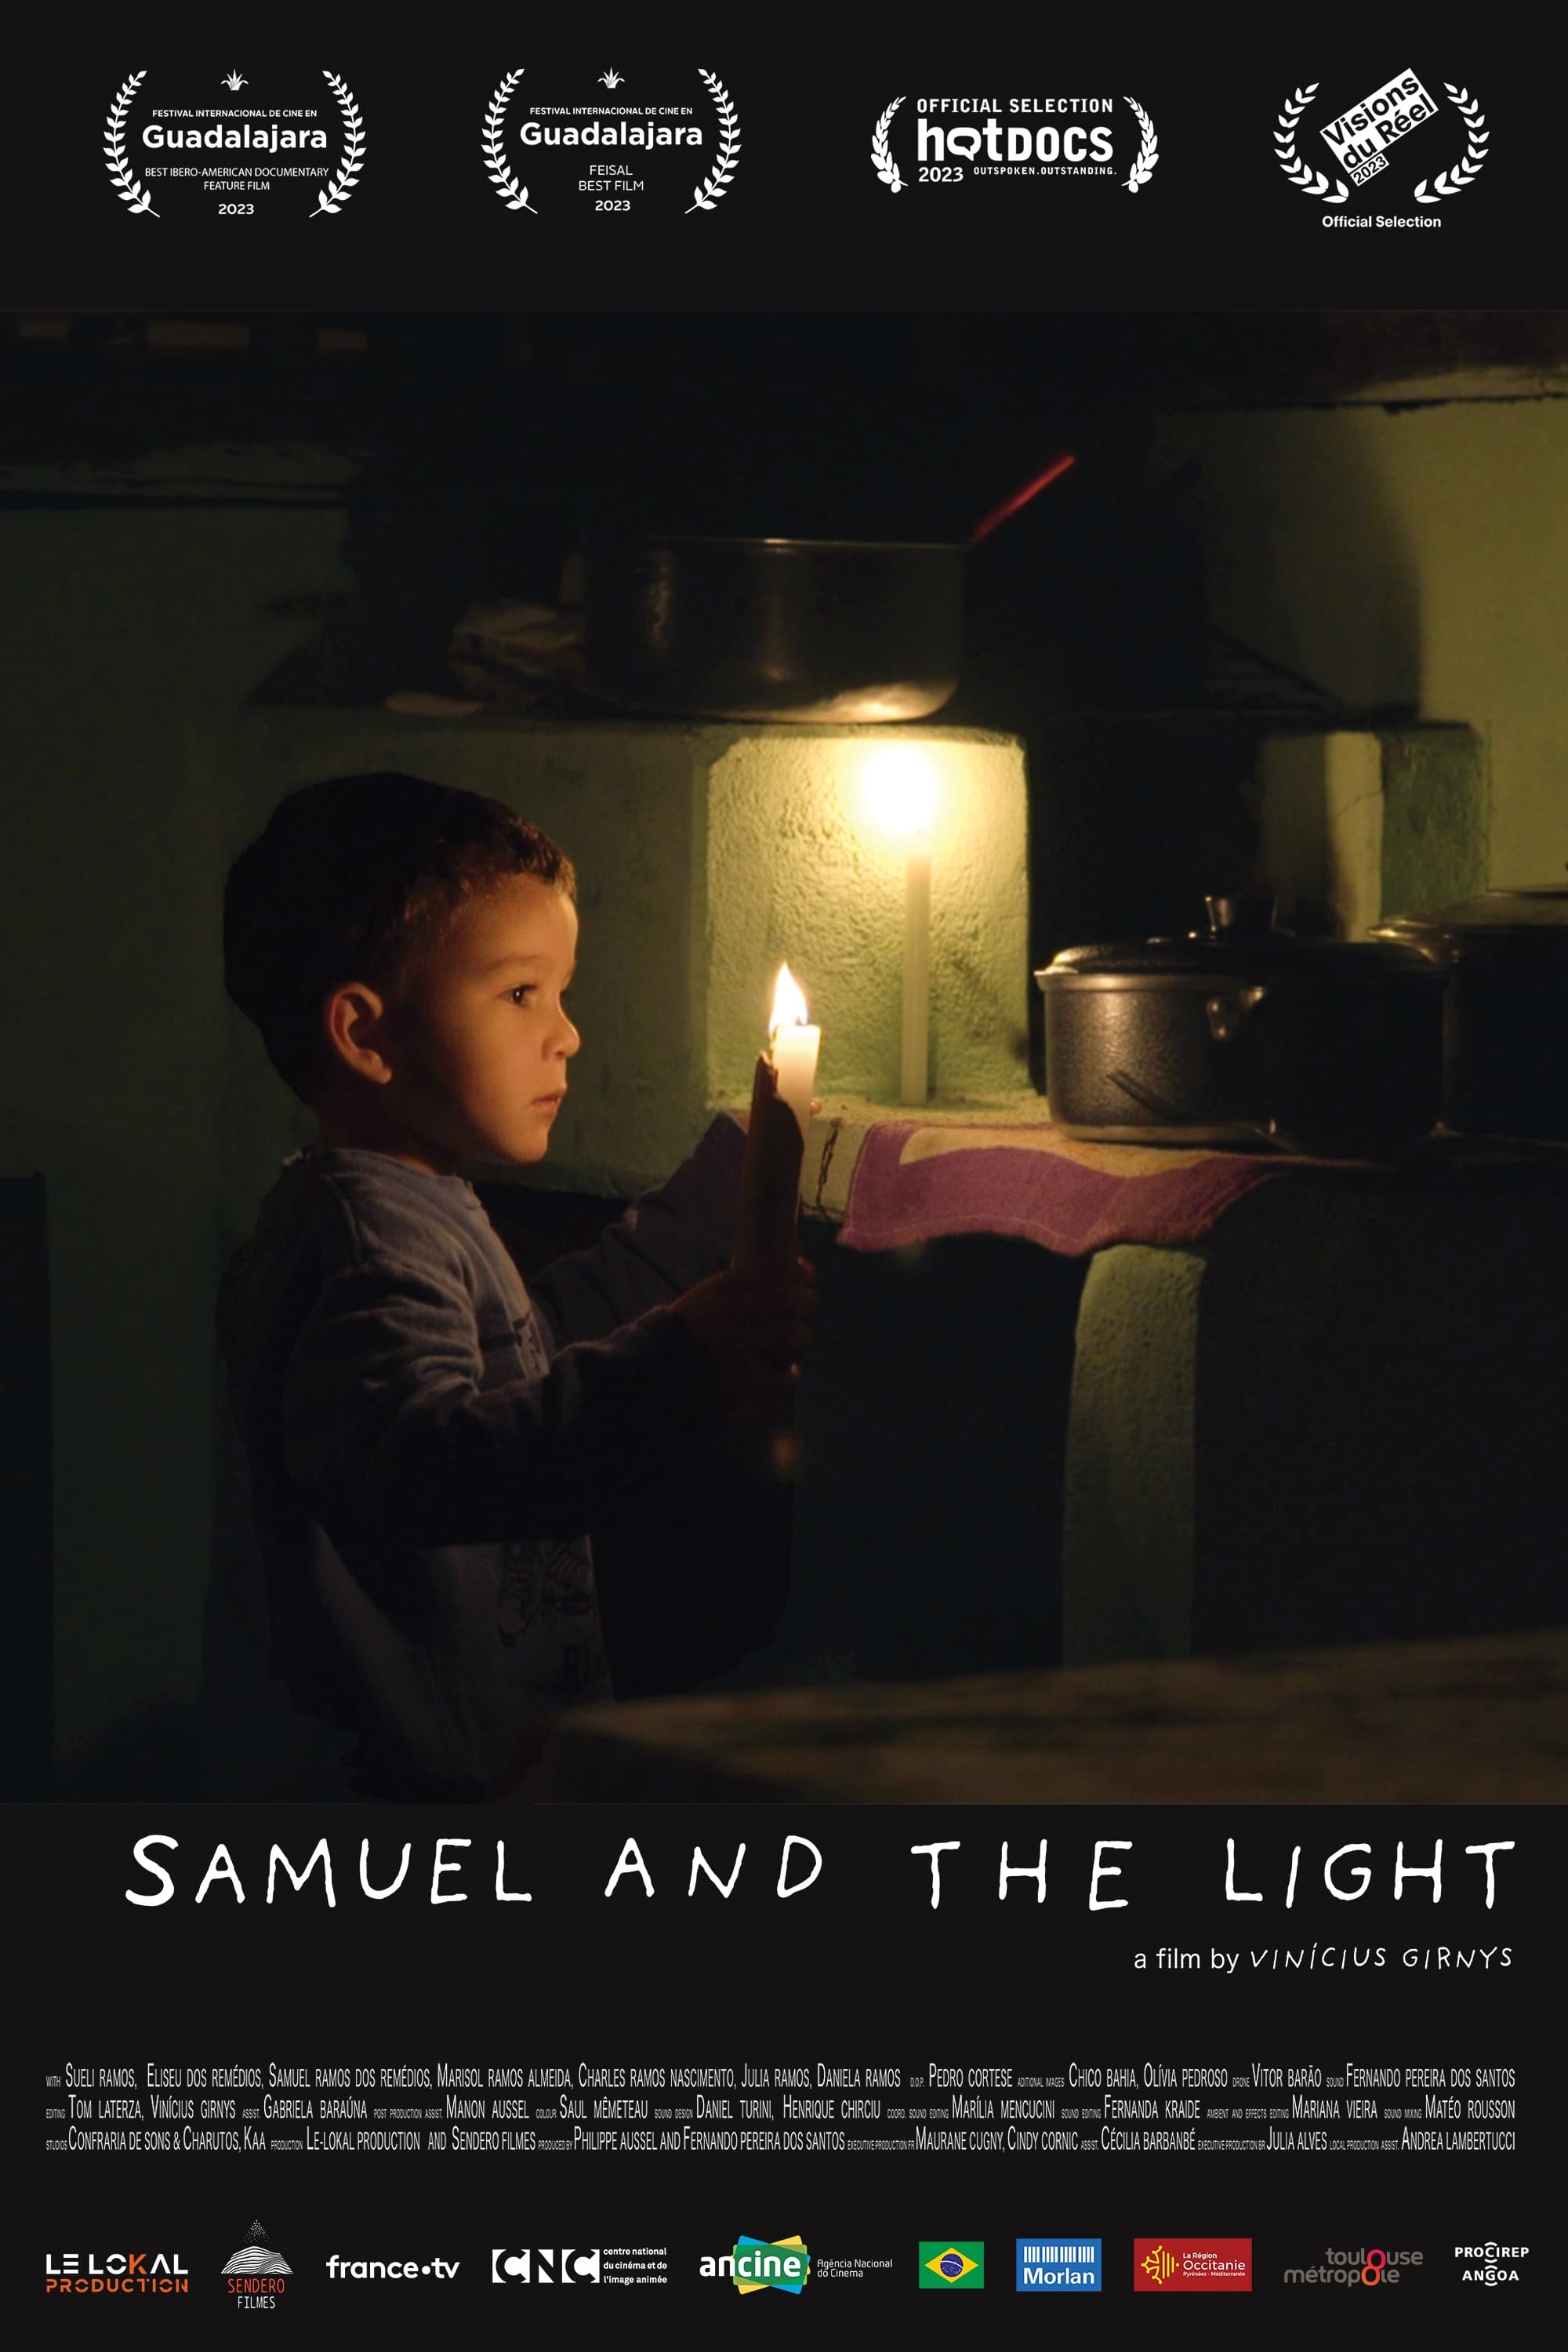 Samuel and the Light